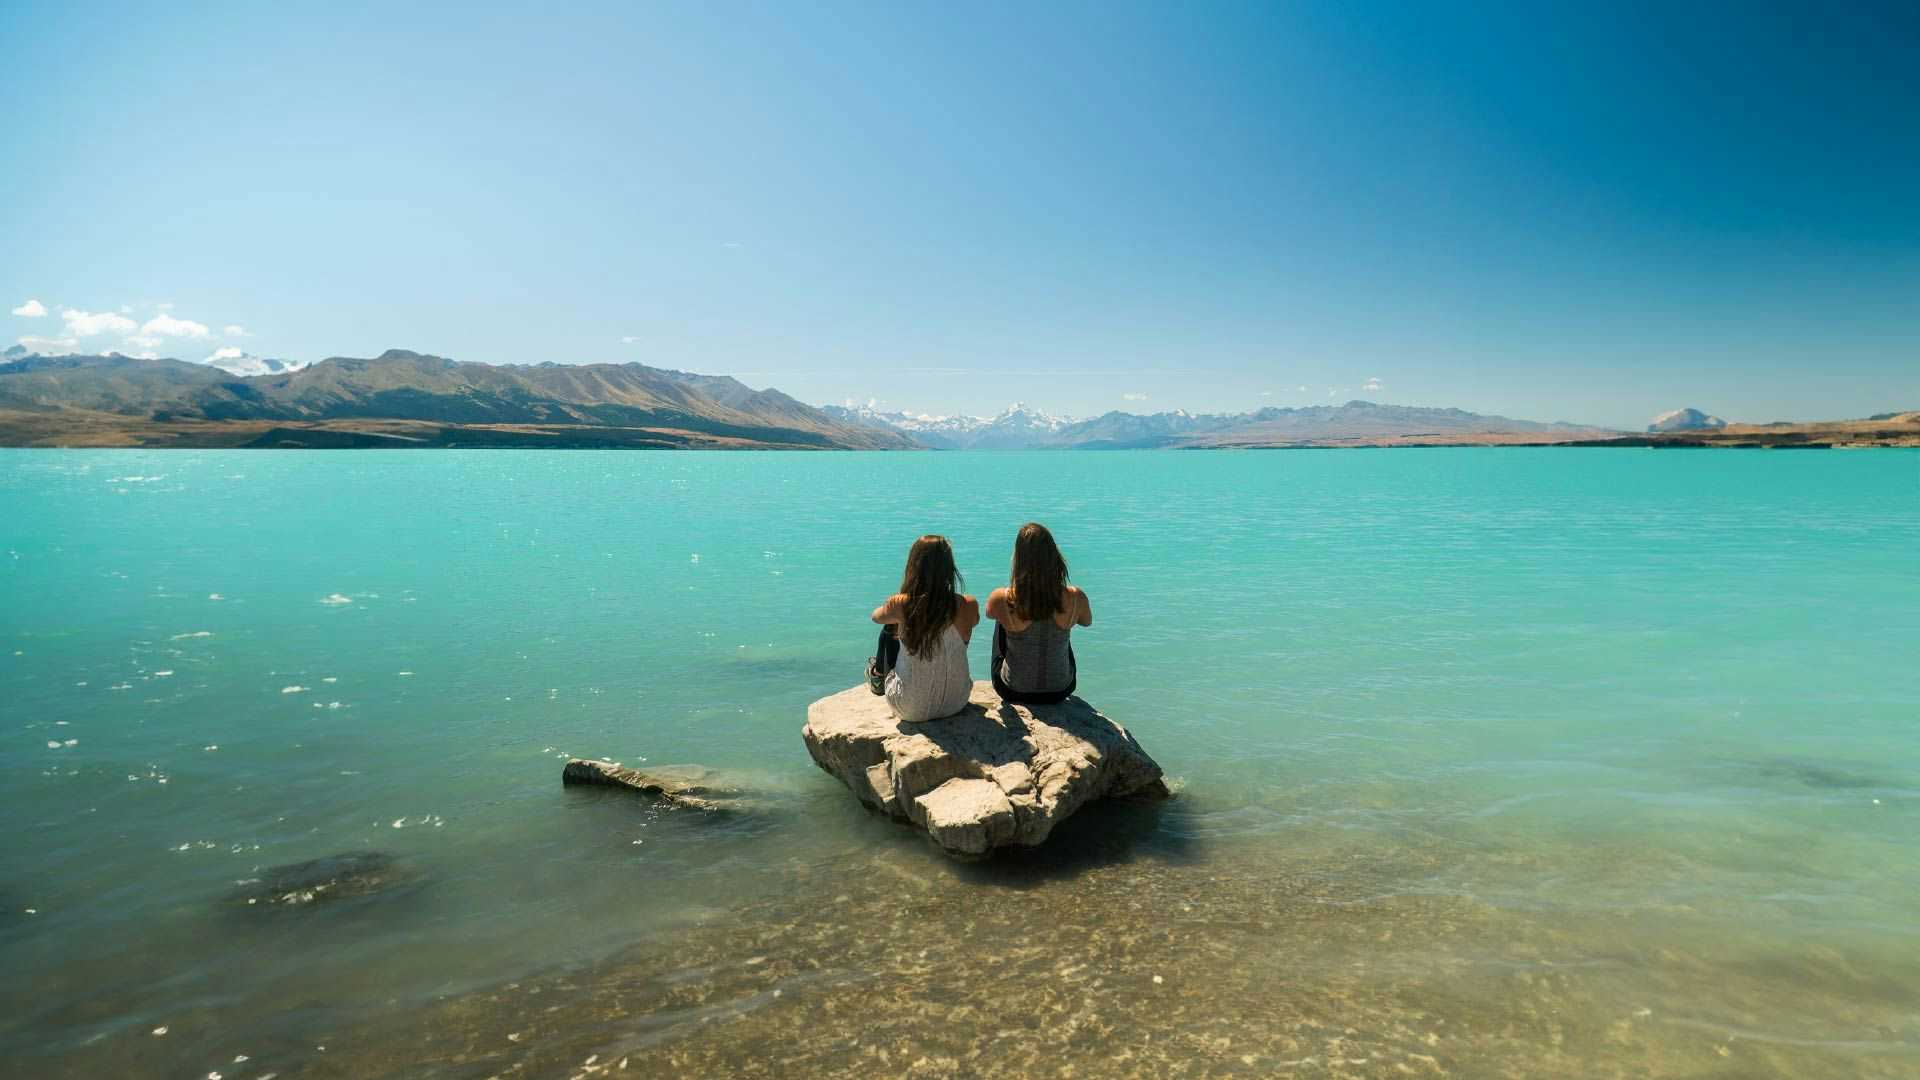 Two women sitting on a rock looking out at Lake Tekapo